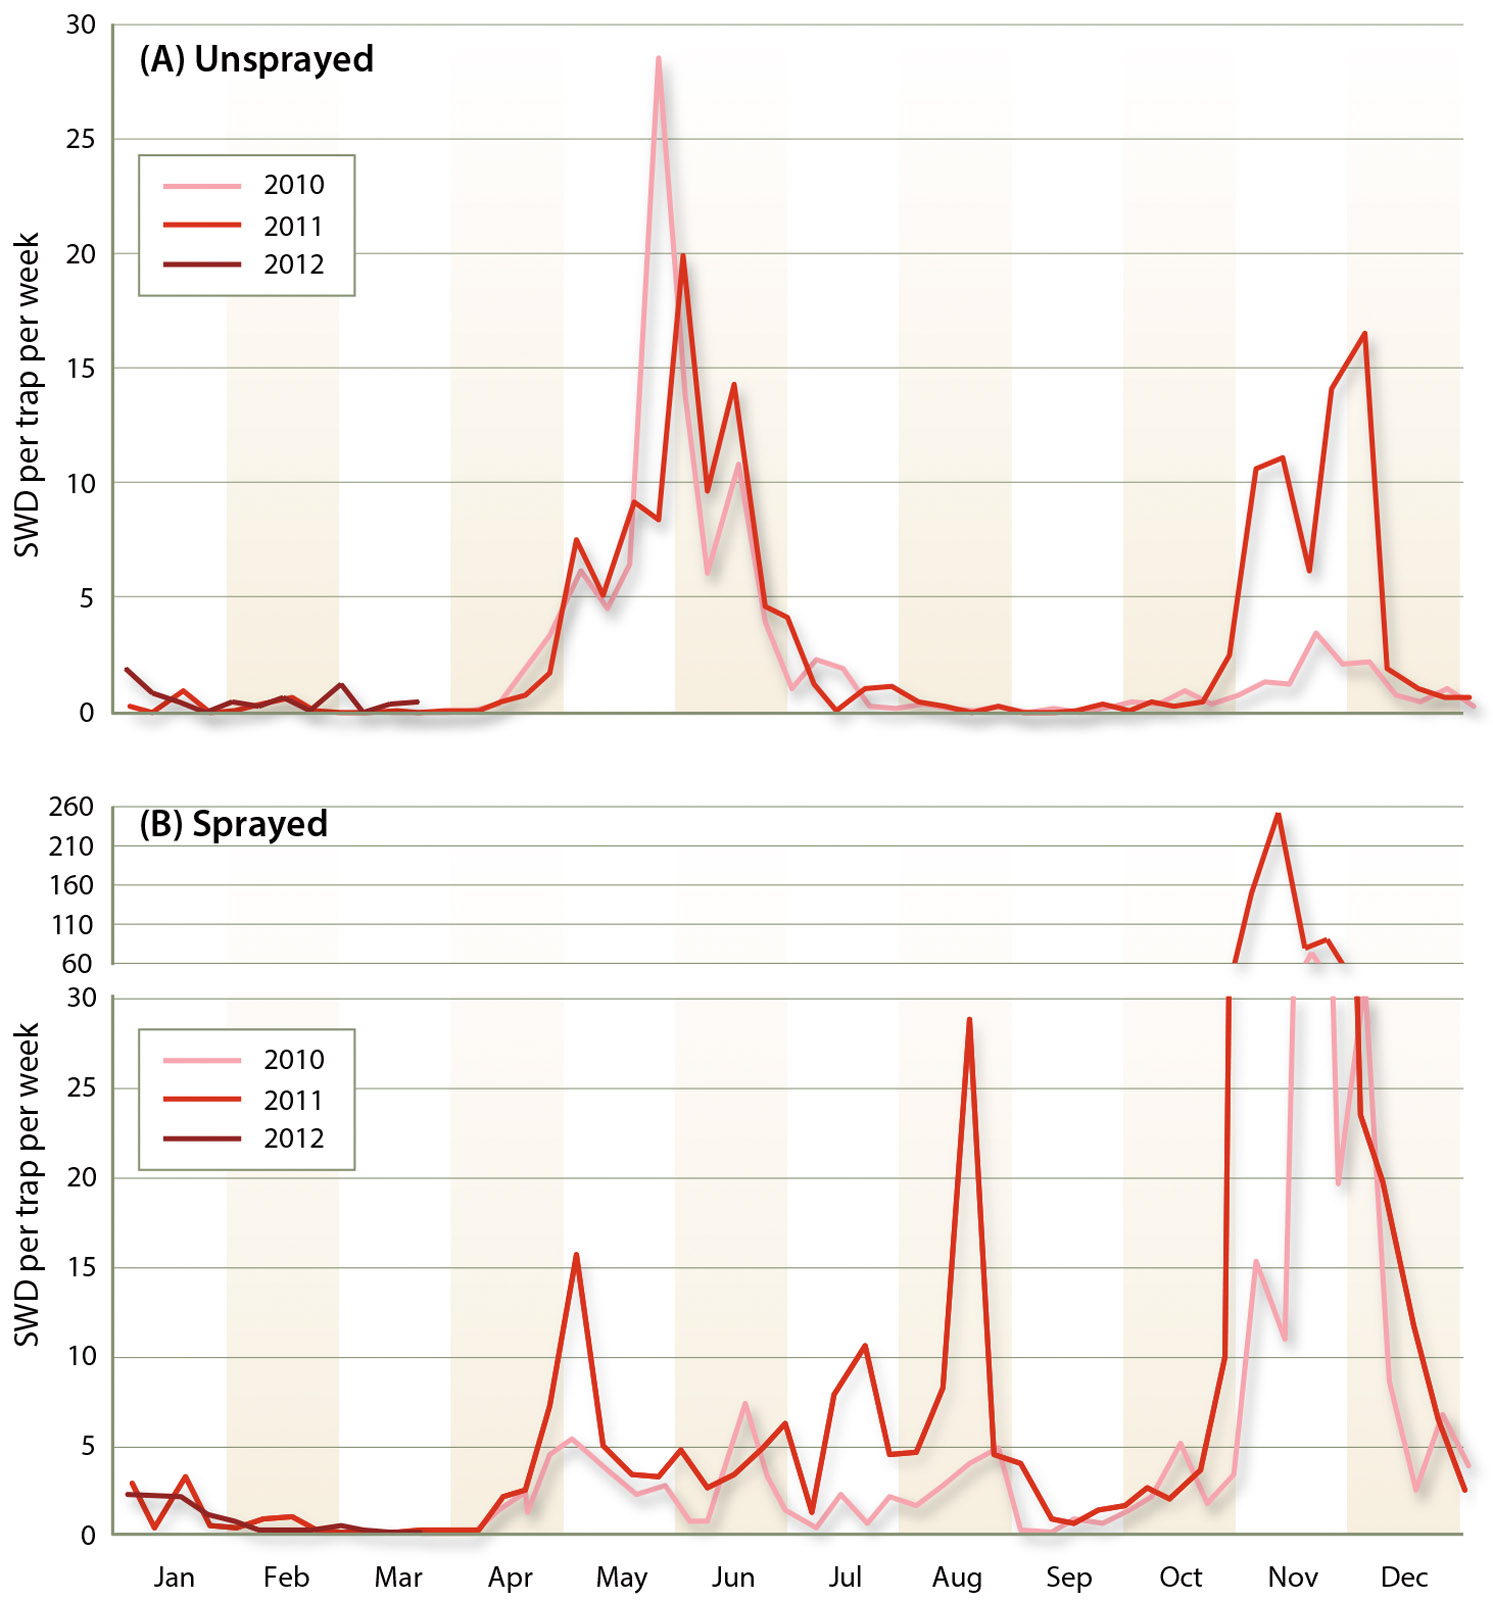 Phenology of captures of adult SWD in sweet cherries in the northern San Joaquin Valley from 2010 to 2012 in (A) unsprayed orchards and (B) sprayed orchards.